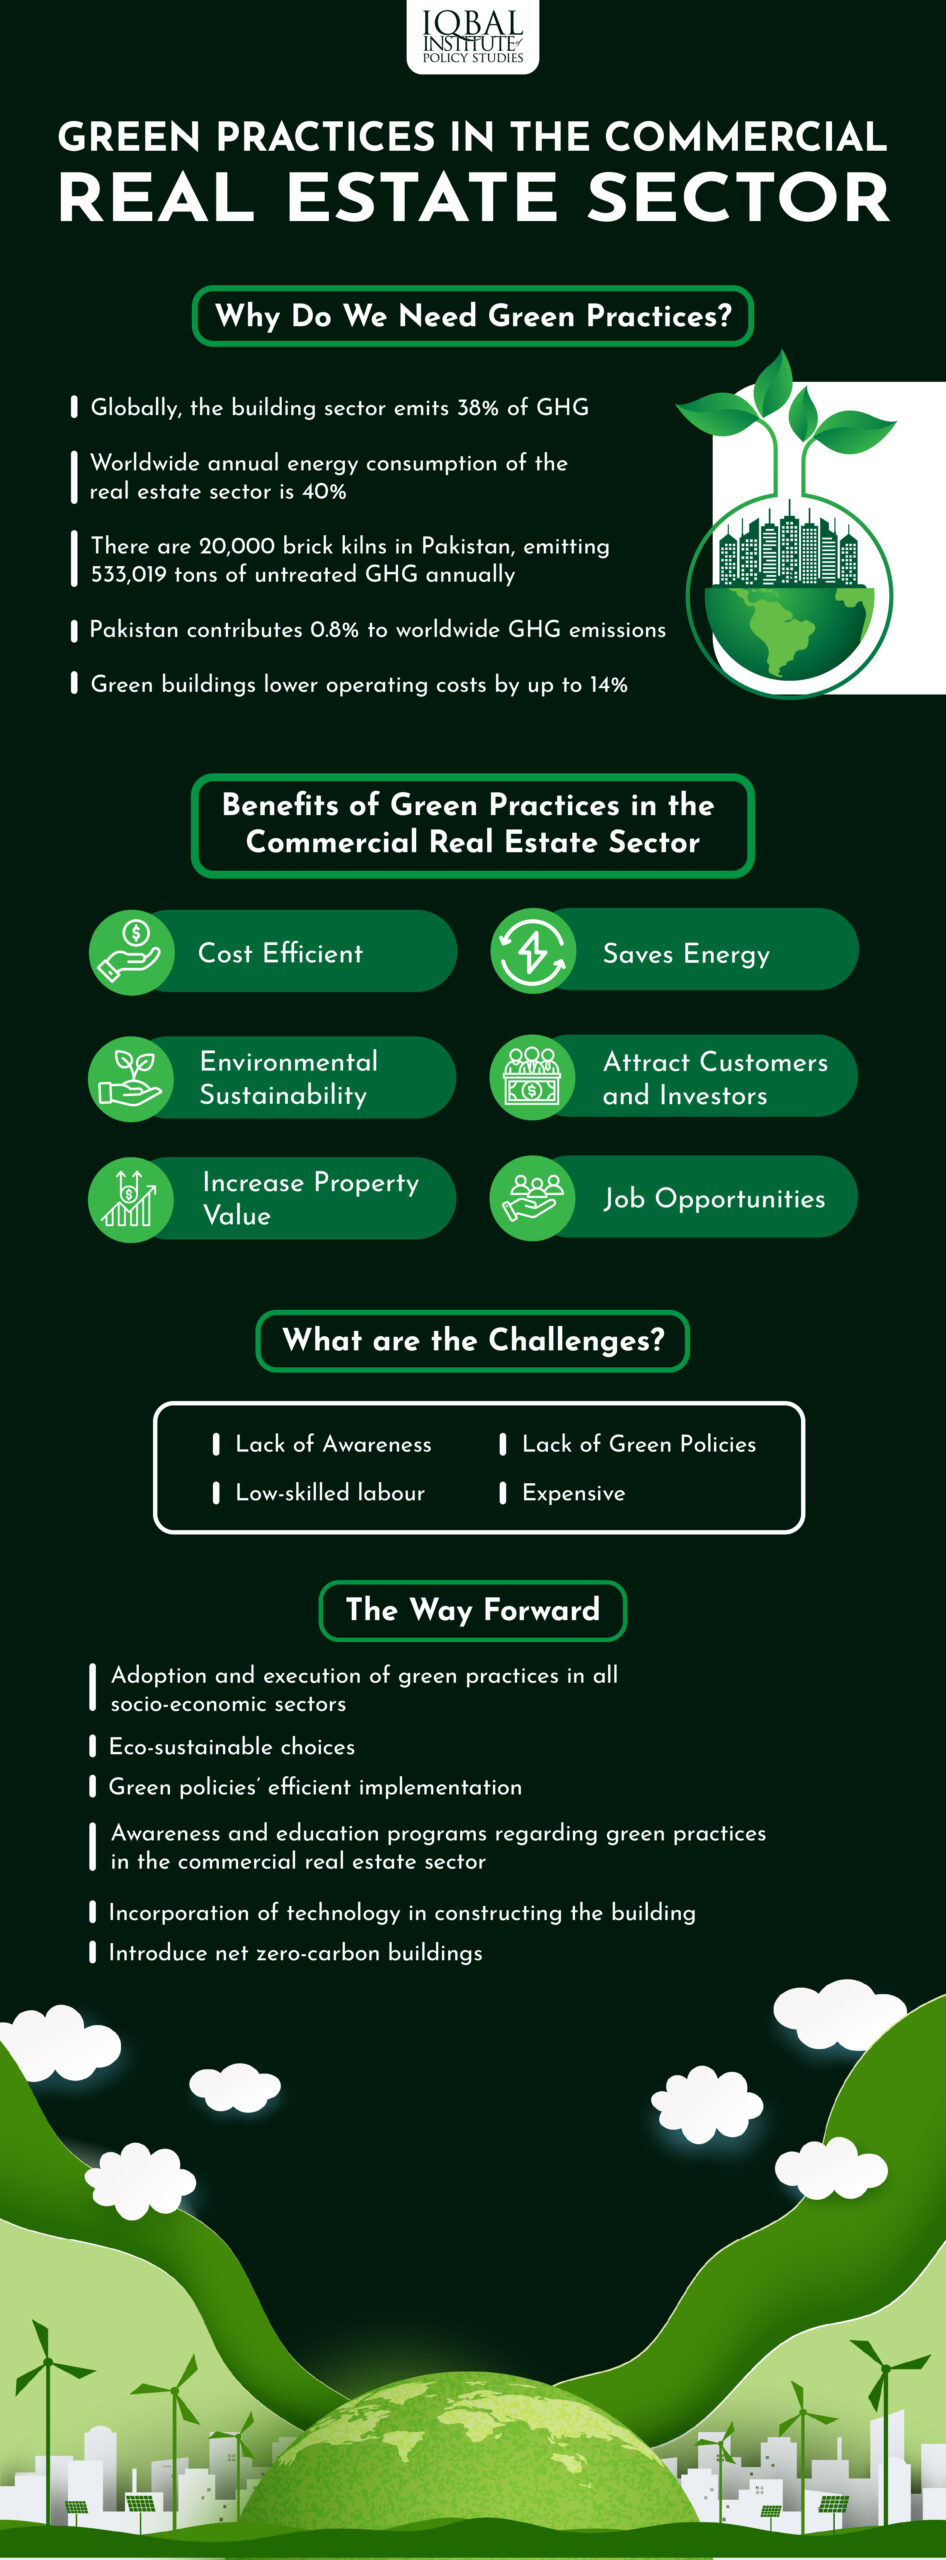 Green Practices in the Commercial Real Estate Sector